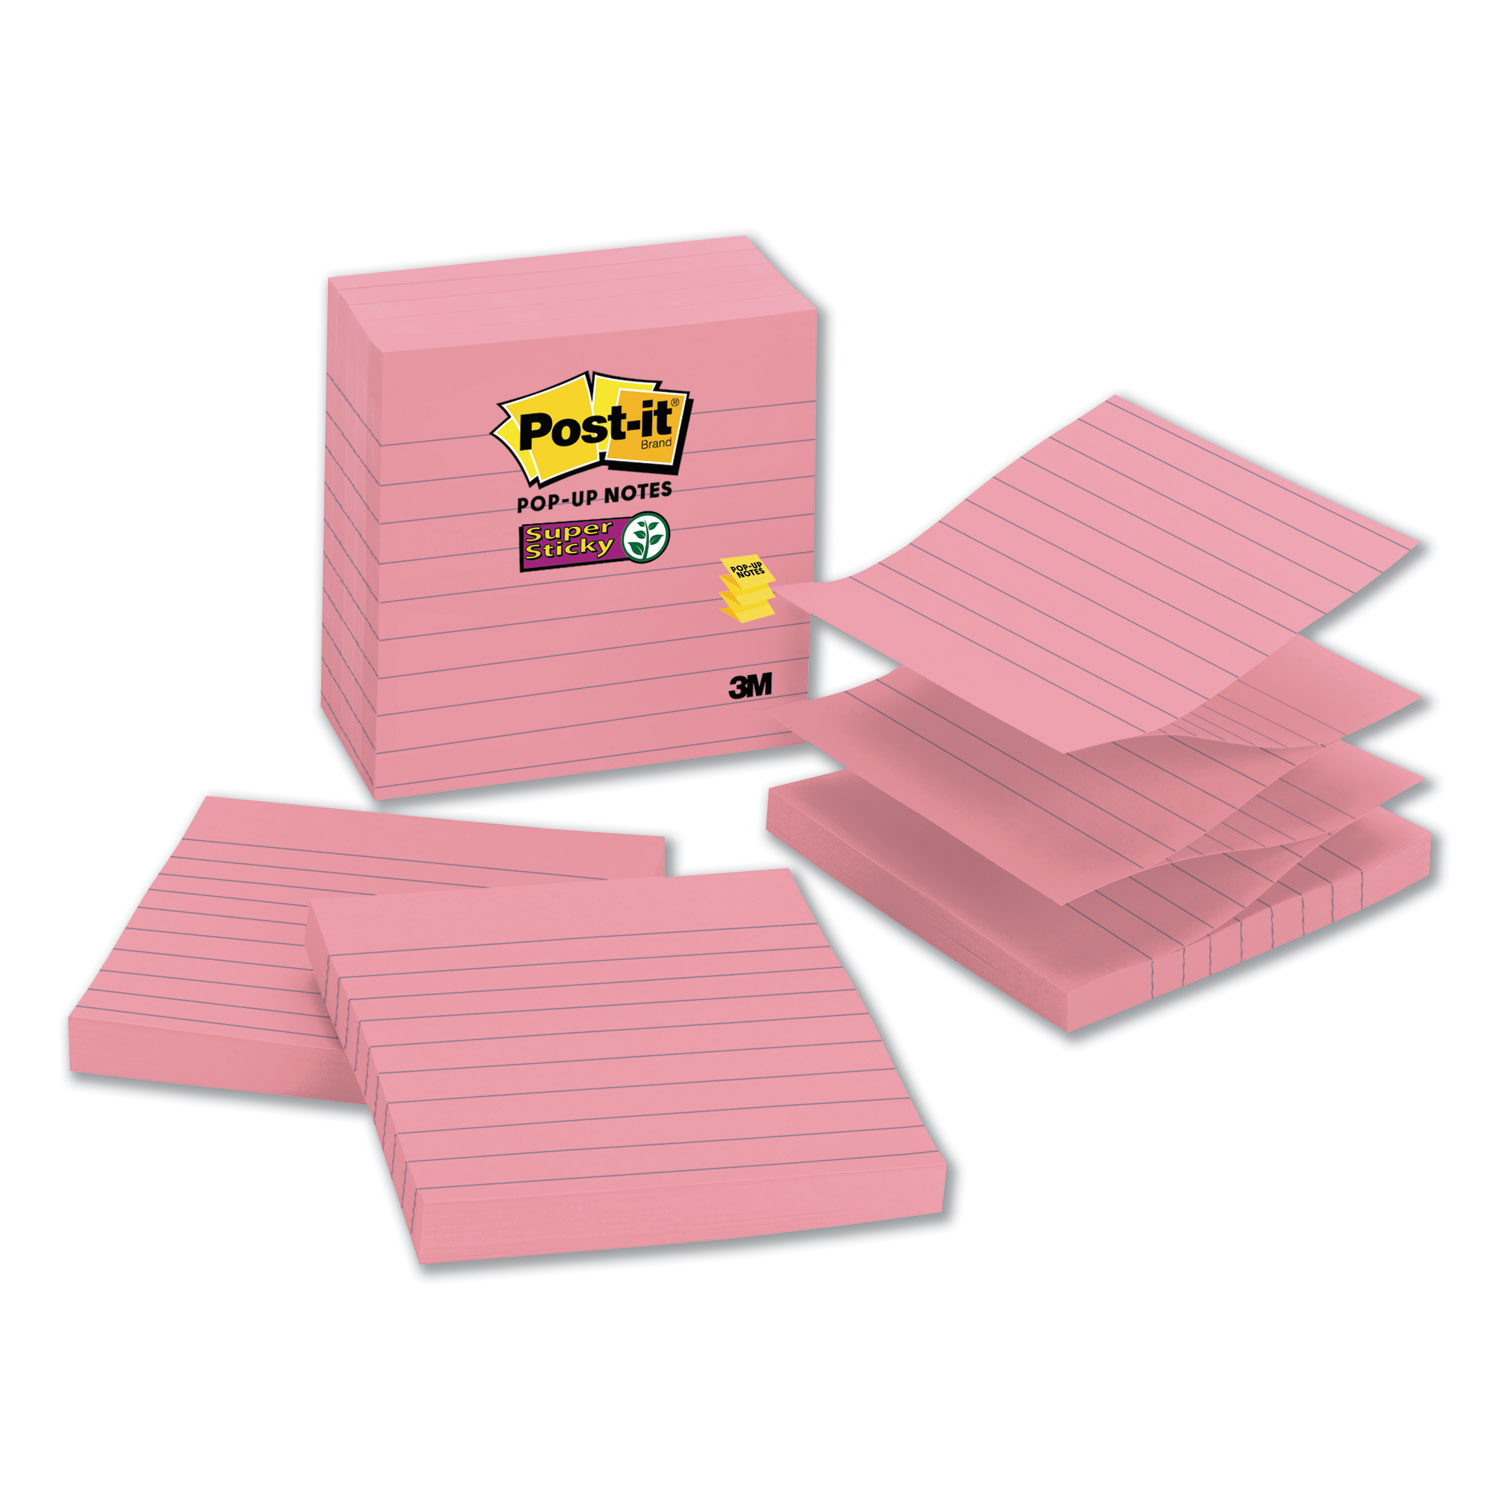  Post-it Pop-up Notes Super Sticky R440NPSS Pop-up Notes Refill, Lined, 4 x 4, Neon Pink, 90-Sheet, 5/Pack (MMMR440NPSS) 